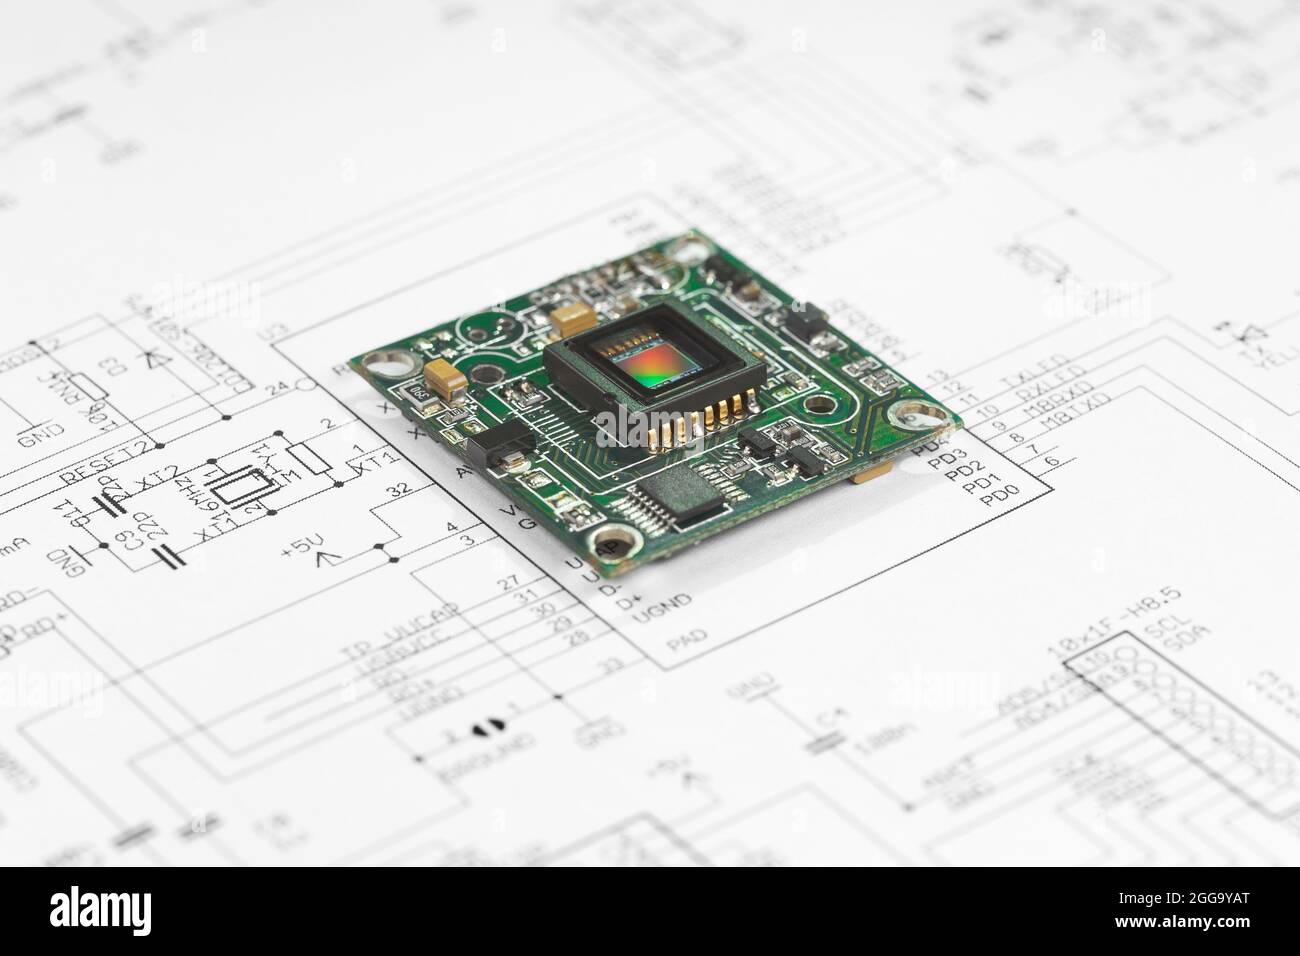 The circuit board with the CMOS sensor lies on the circuit diagram Stock Photo